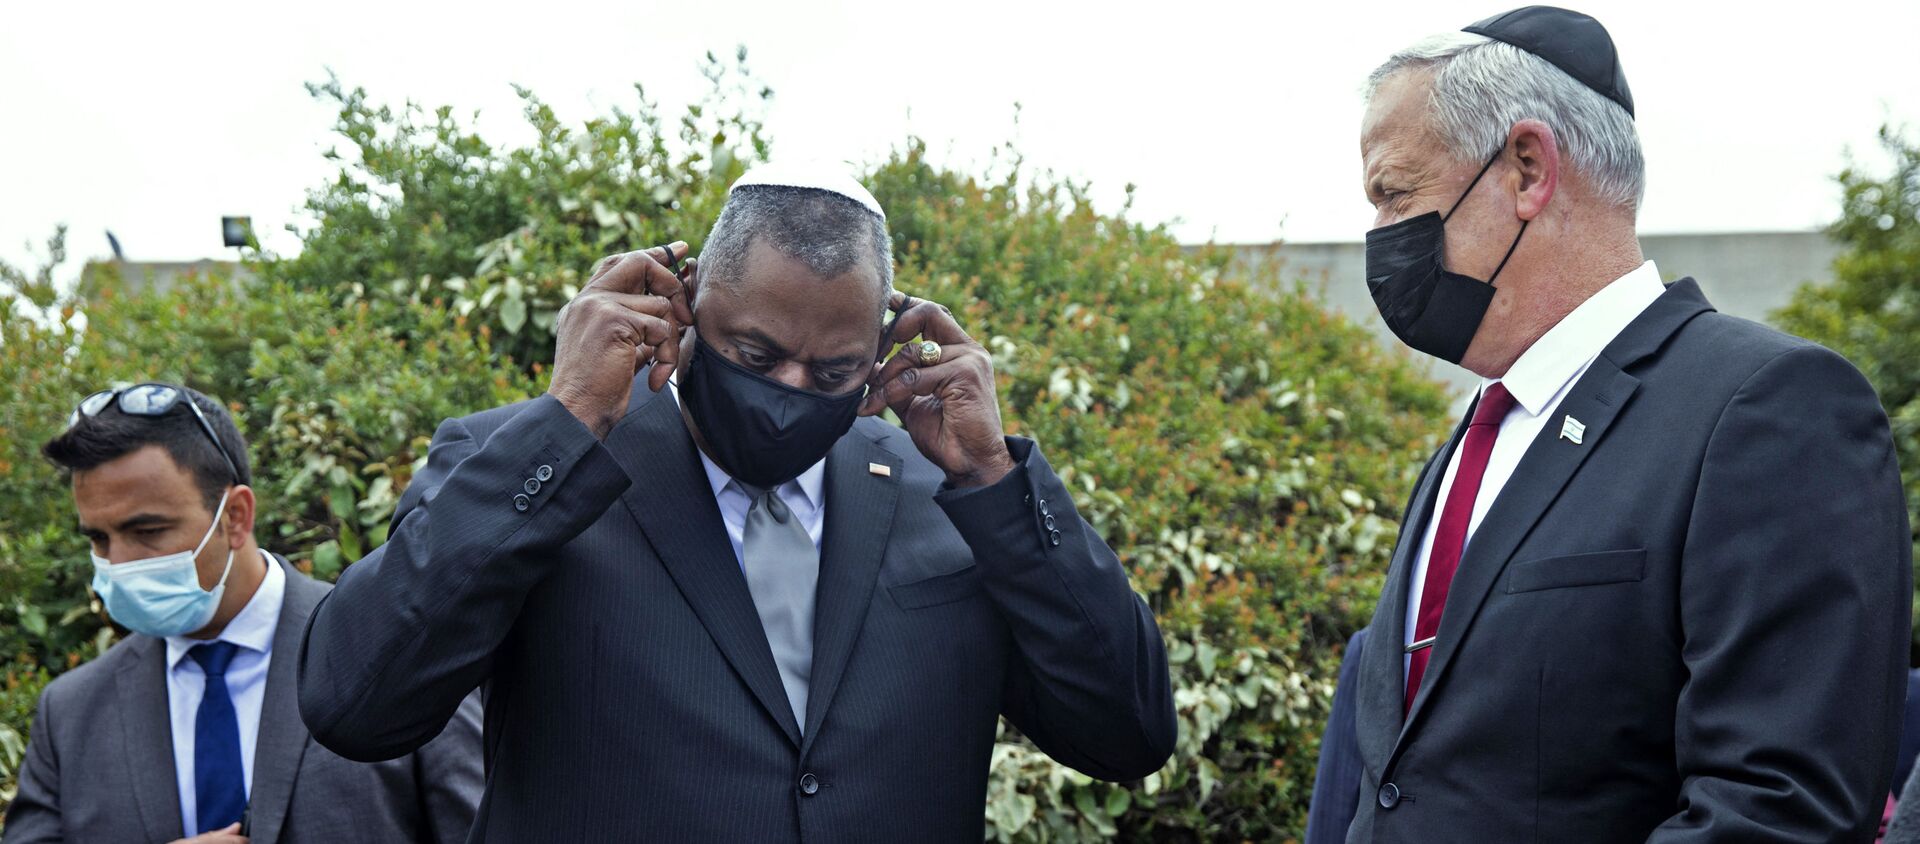 US Secretary of Defence Lloyd Austin (C) removes his mask as he stands with Israeli Defence Minister Benny Gantz (R) after a ceremony in the Hall of Remembrance at the Yad Vashem Holocaust Memorial, in Jerusalem on Monday, April 12, 2021.  - Sputnik International, 1920, 12.04.2021